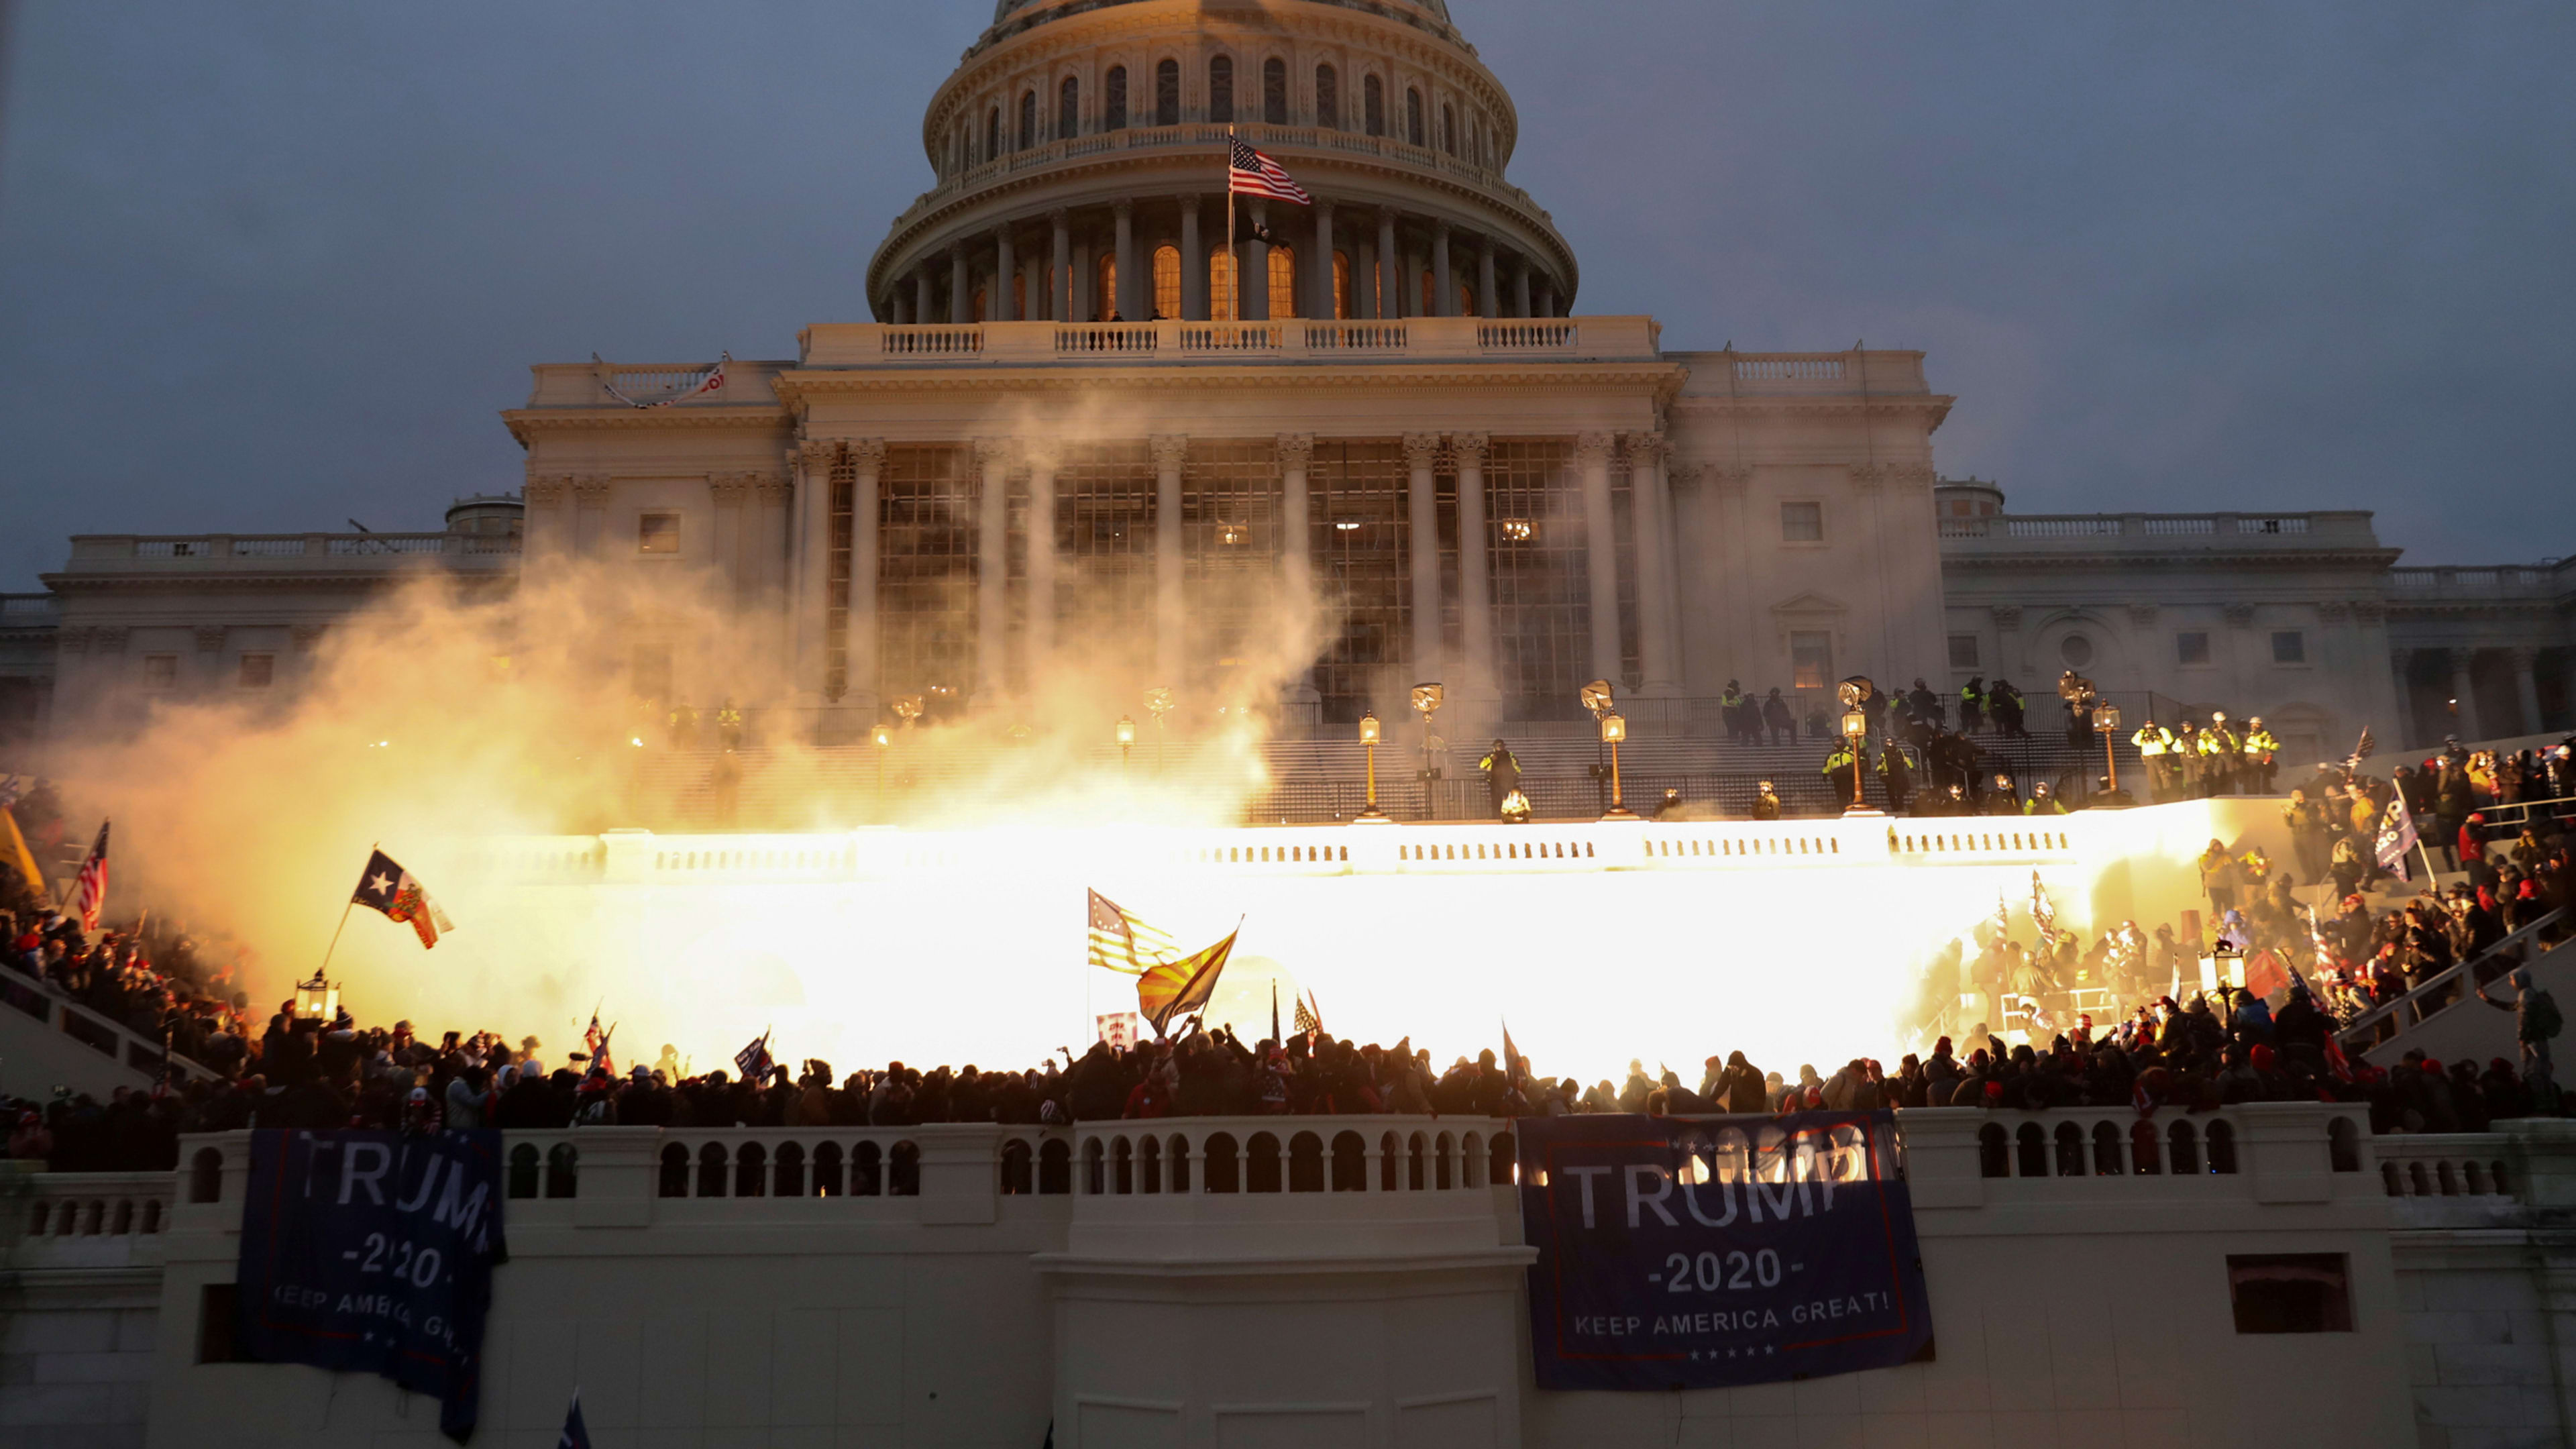 How one Reuters photographer captured the insurrection at the U.S. Capitol